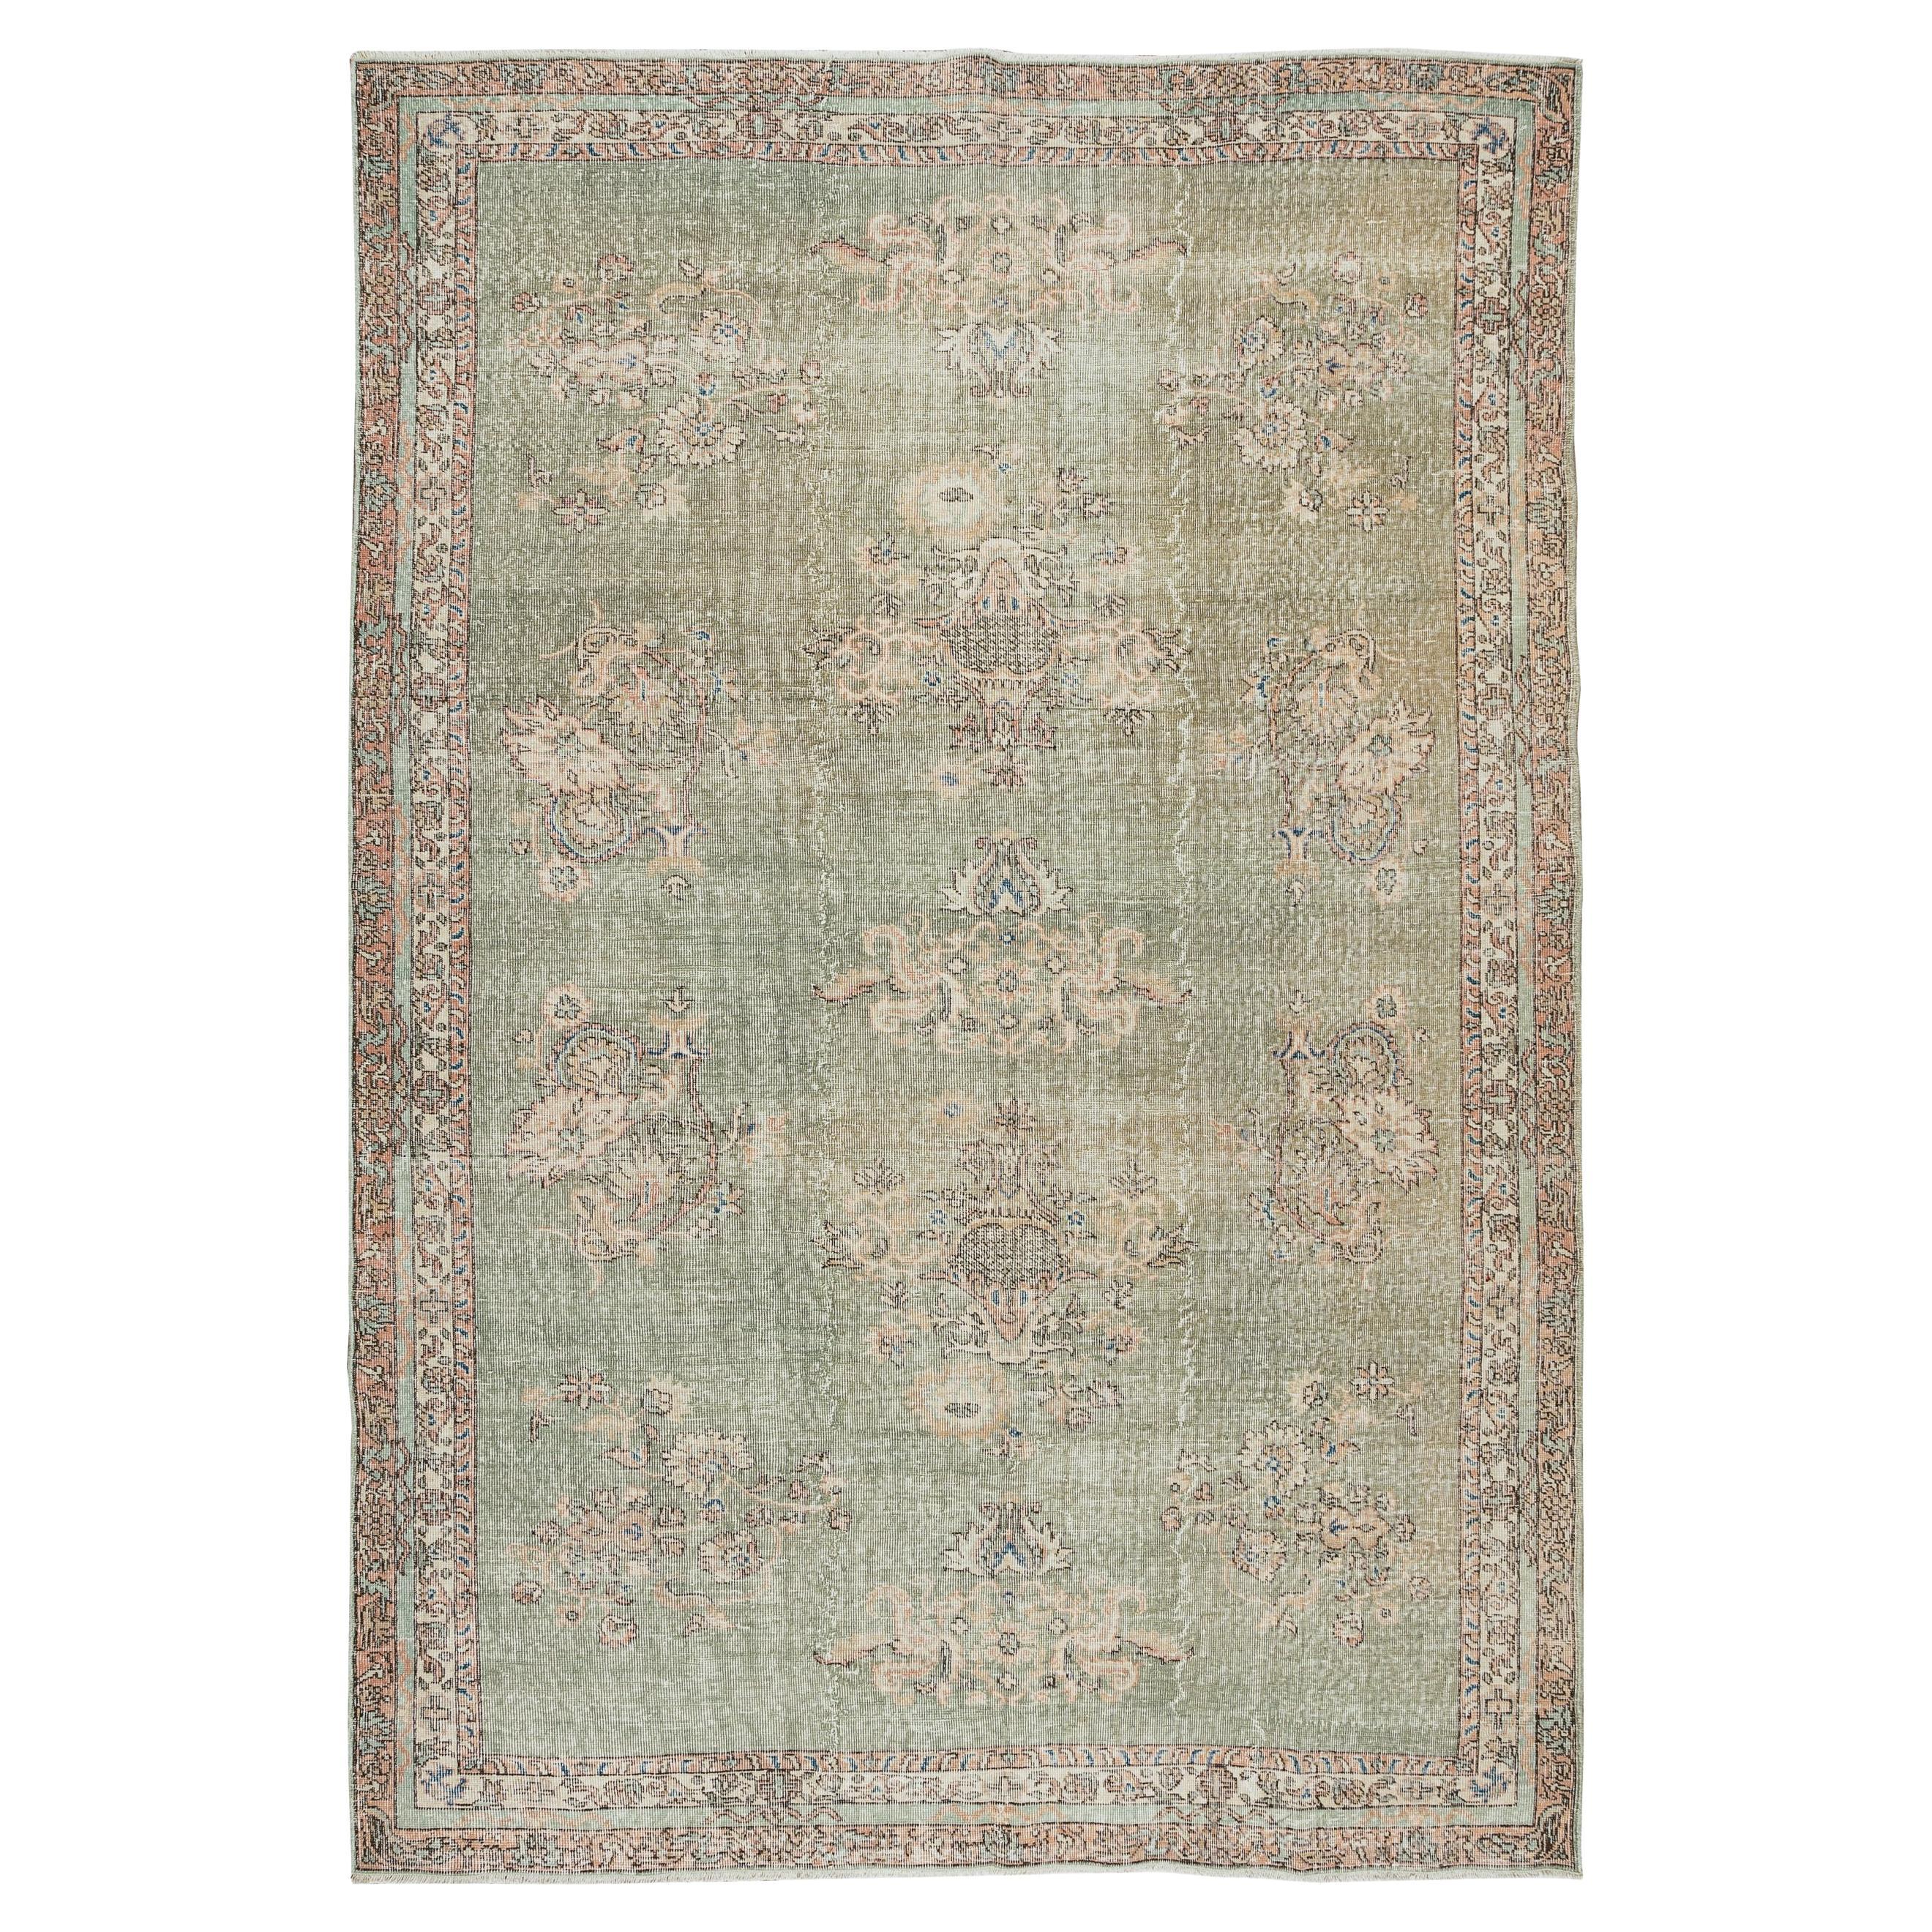 6.7x10 Ft Vintage Floral Pattern Handmade Turkish Area Rug in Shades of Green